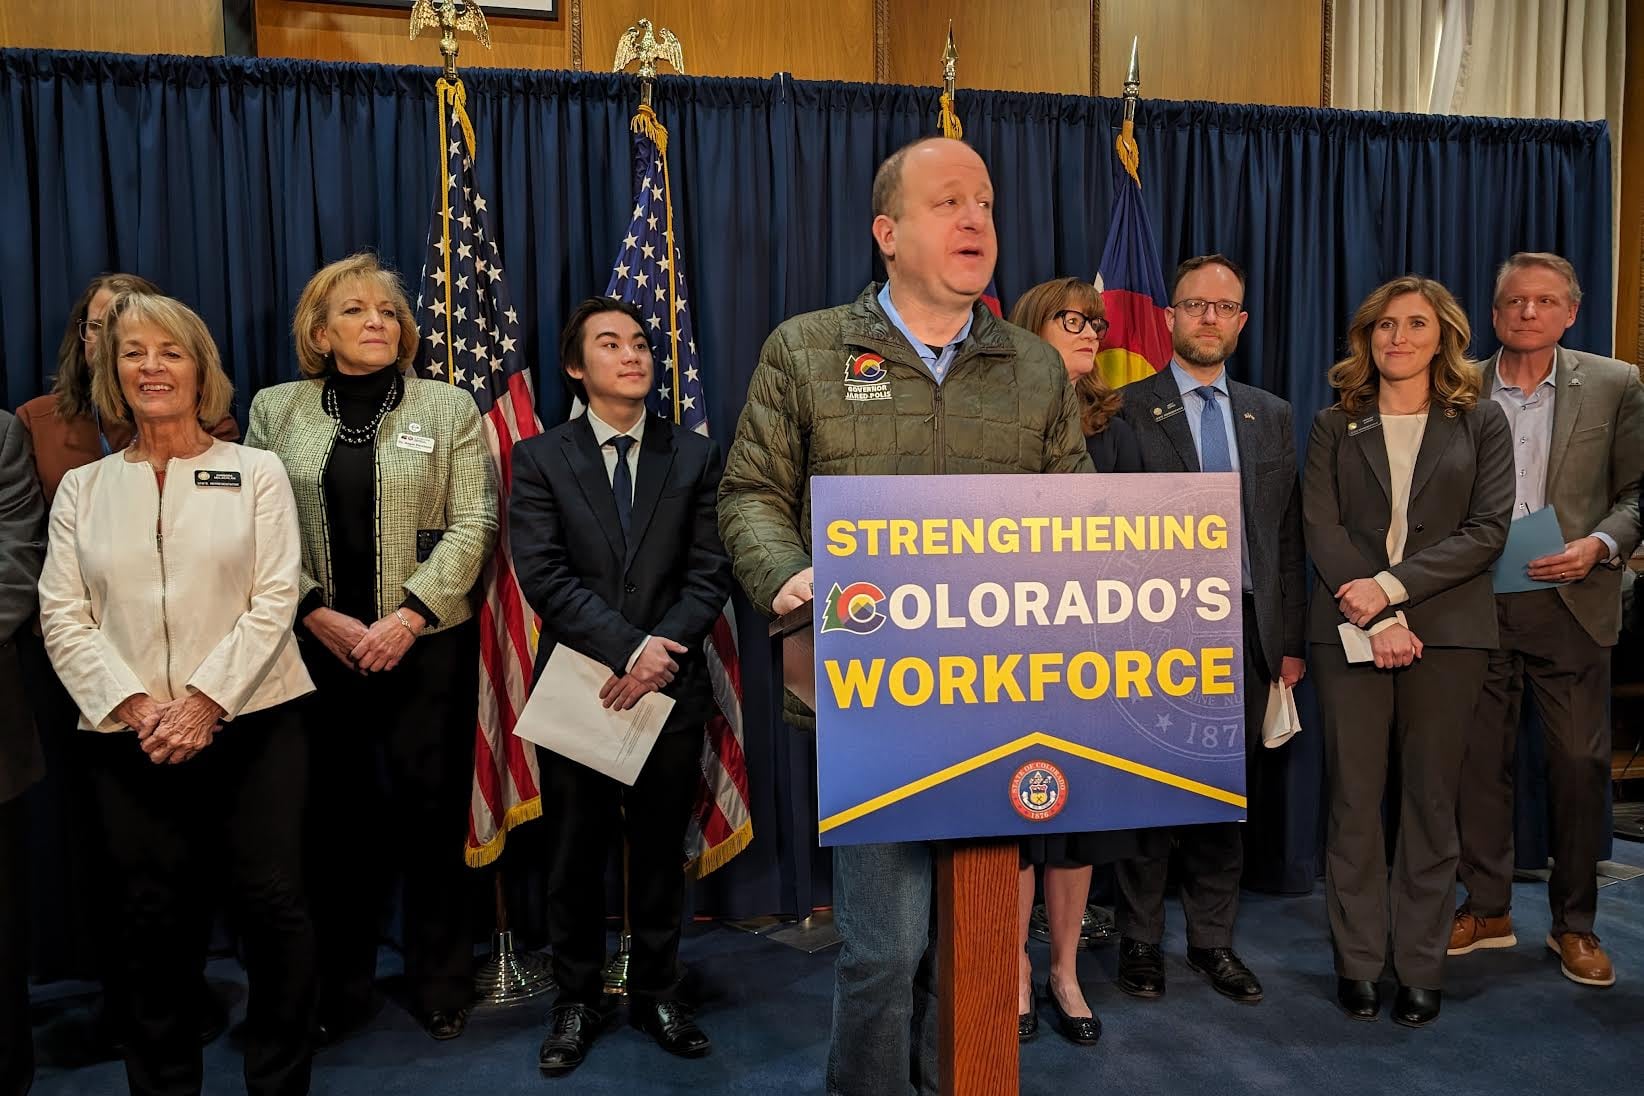 A man wearing a green jacket stands at a podium with a sign that reads "Strengthening Colorado's workforce." There is a group of people standing in a row with flags in the background.